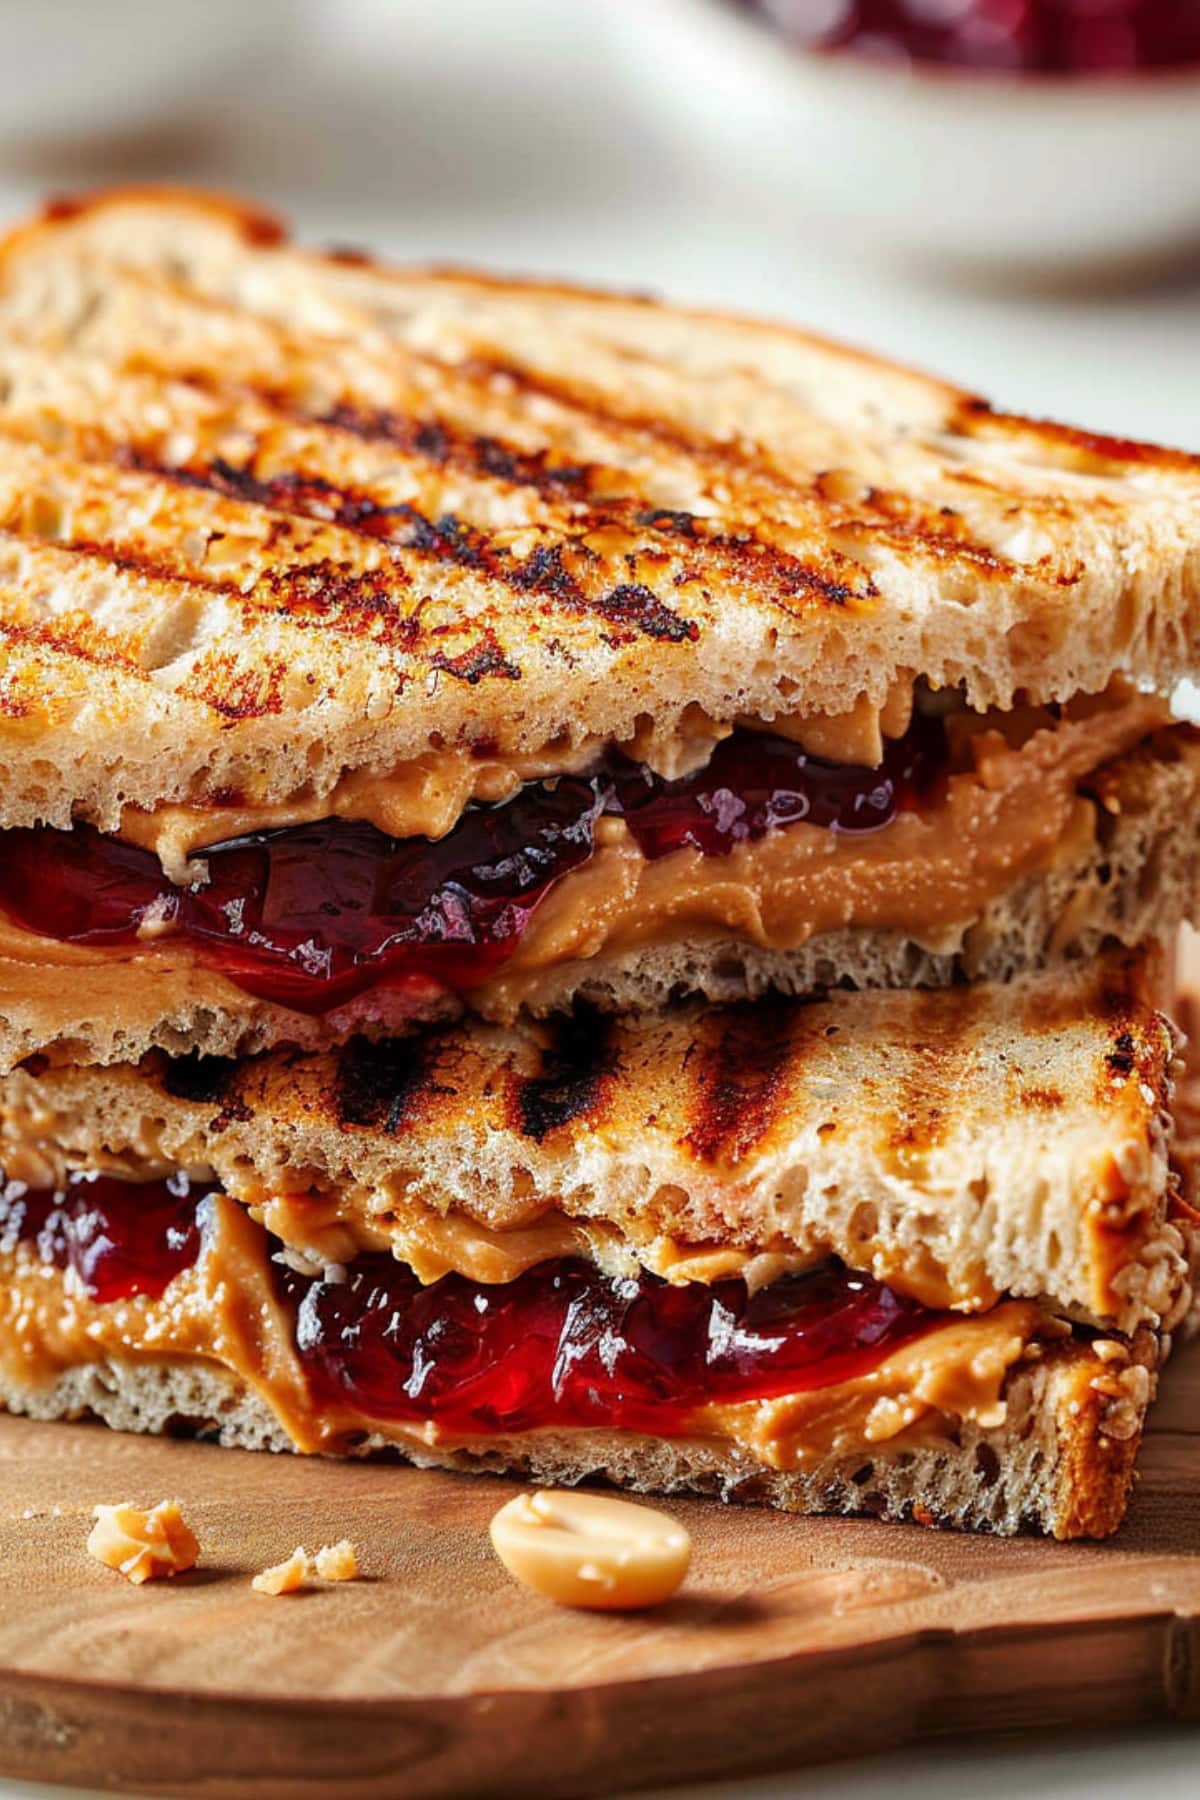 Peanut butter and jelly sandwich stack and cut in half.